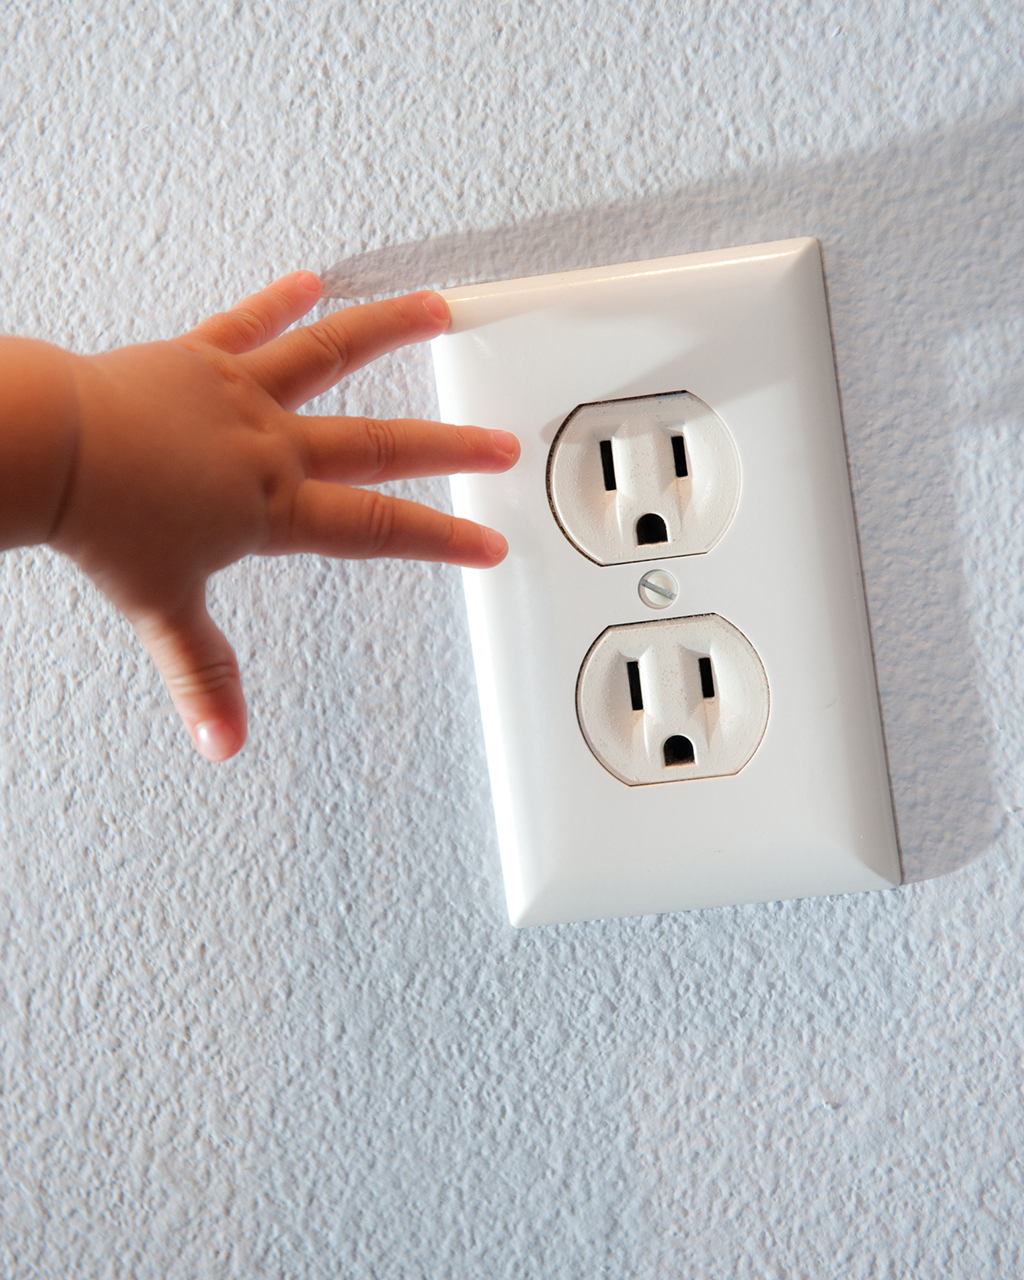 Emergency Electrician: Why Getting Your Home Up to Code Helps Avoid Electrical Emergencies | Wilmington, NC